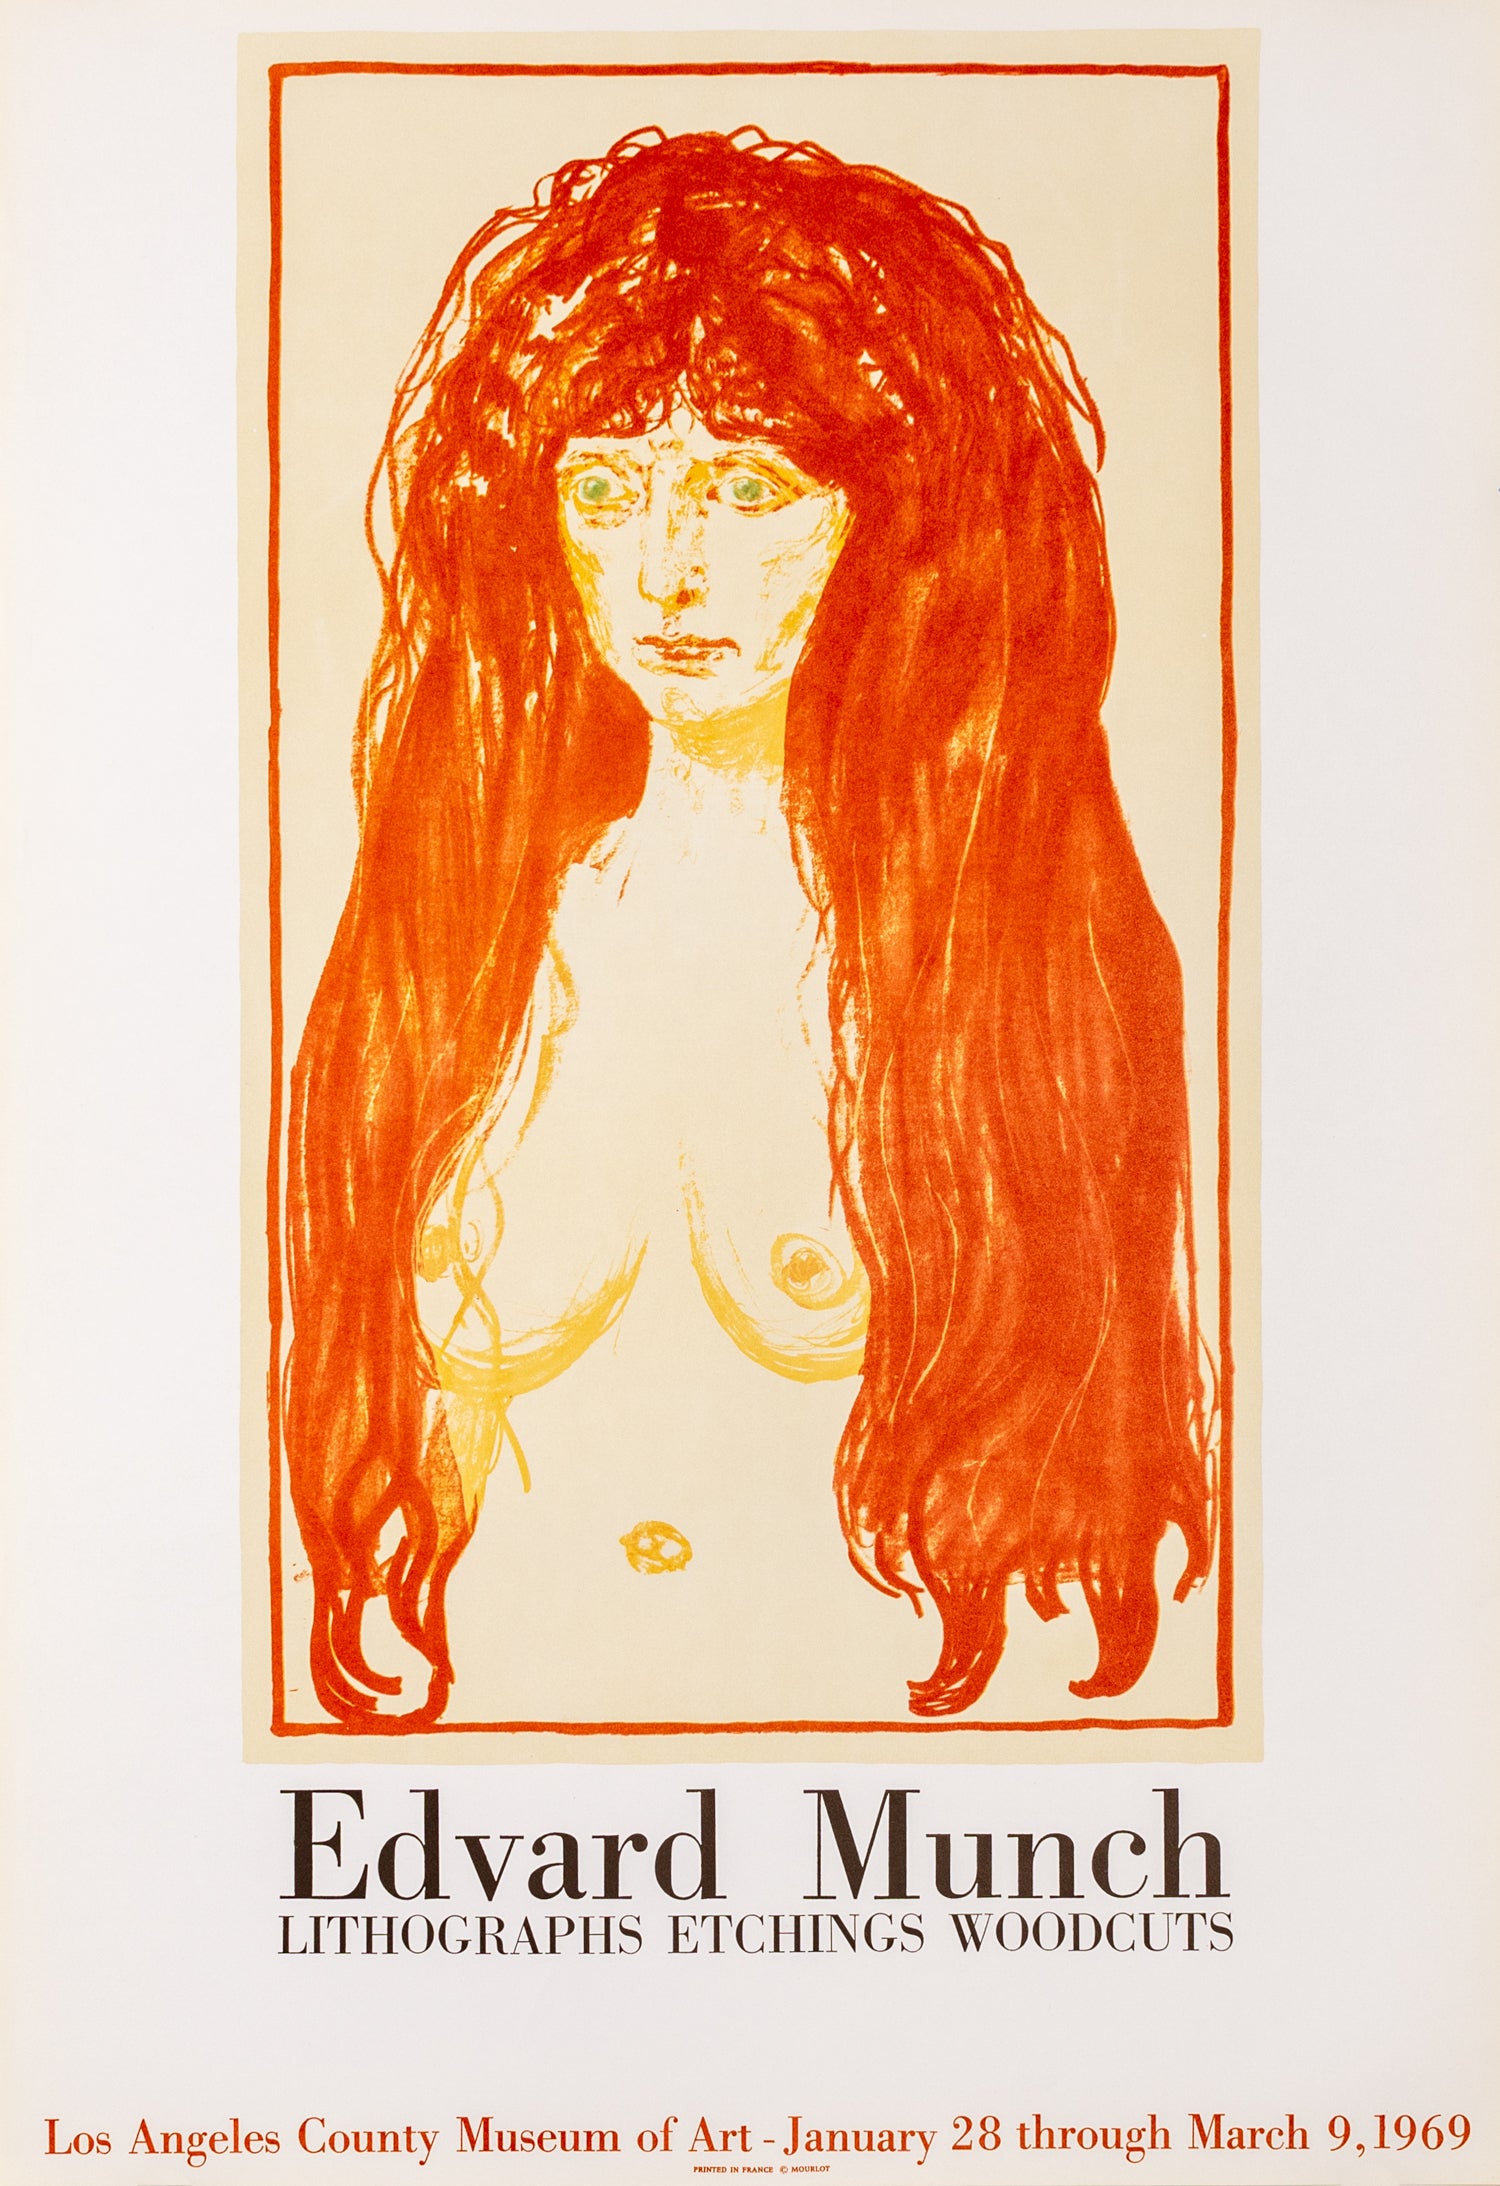 The Sin - Lithographs Etchings Woodcuts - LACMA (after) Edvard Munch, 1969 - Mourlot Editions - Fine_Art - Poster - Lithograph - Wall Art - Vintage - Prints - Original